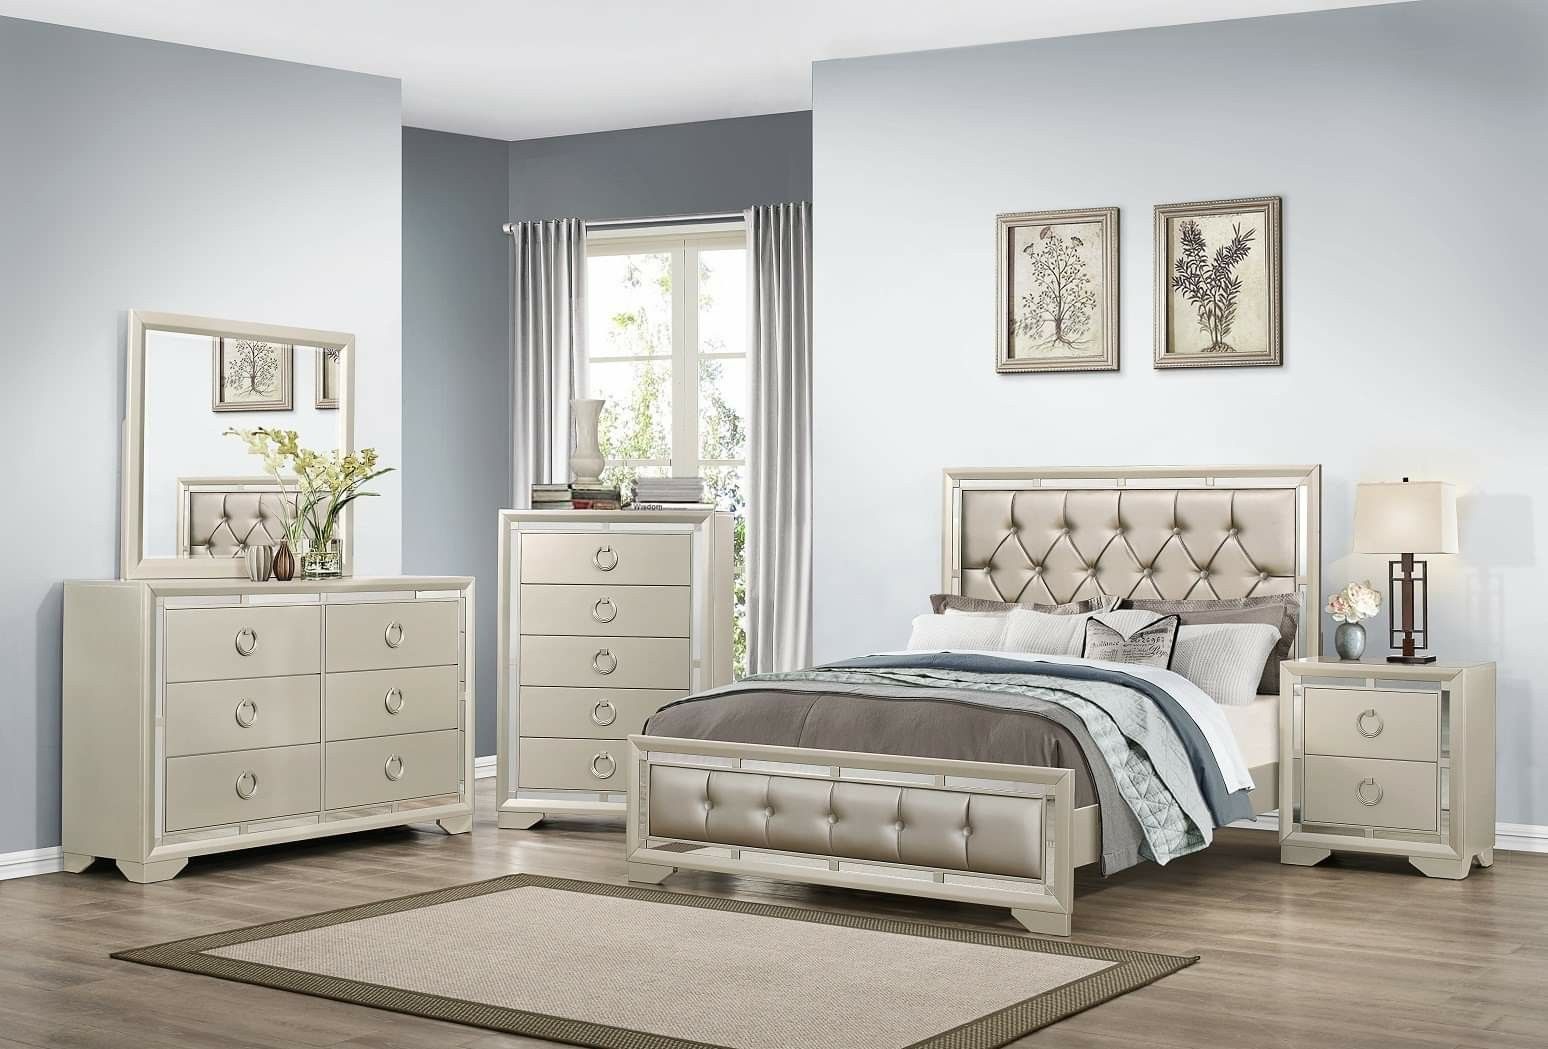 BEAUTIFUL NEW JASMINE QUEEN BED, DRESSER, MIRROR AND NIGHT STAND SET ON SALE ONLY $799. KING SET $899. NO CREDIT CHECK FINANCING!